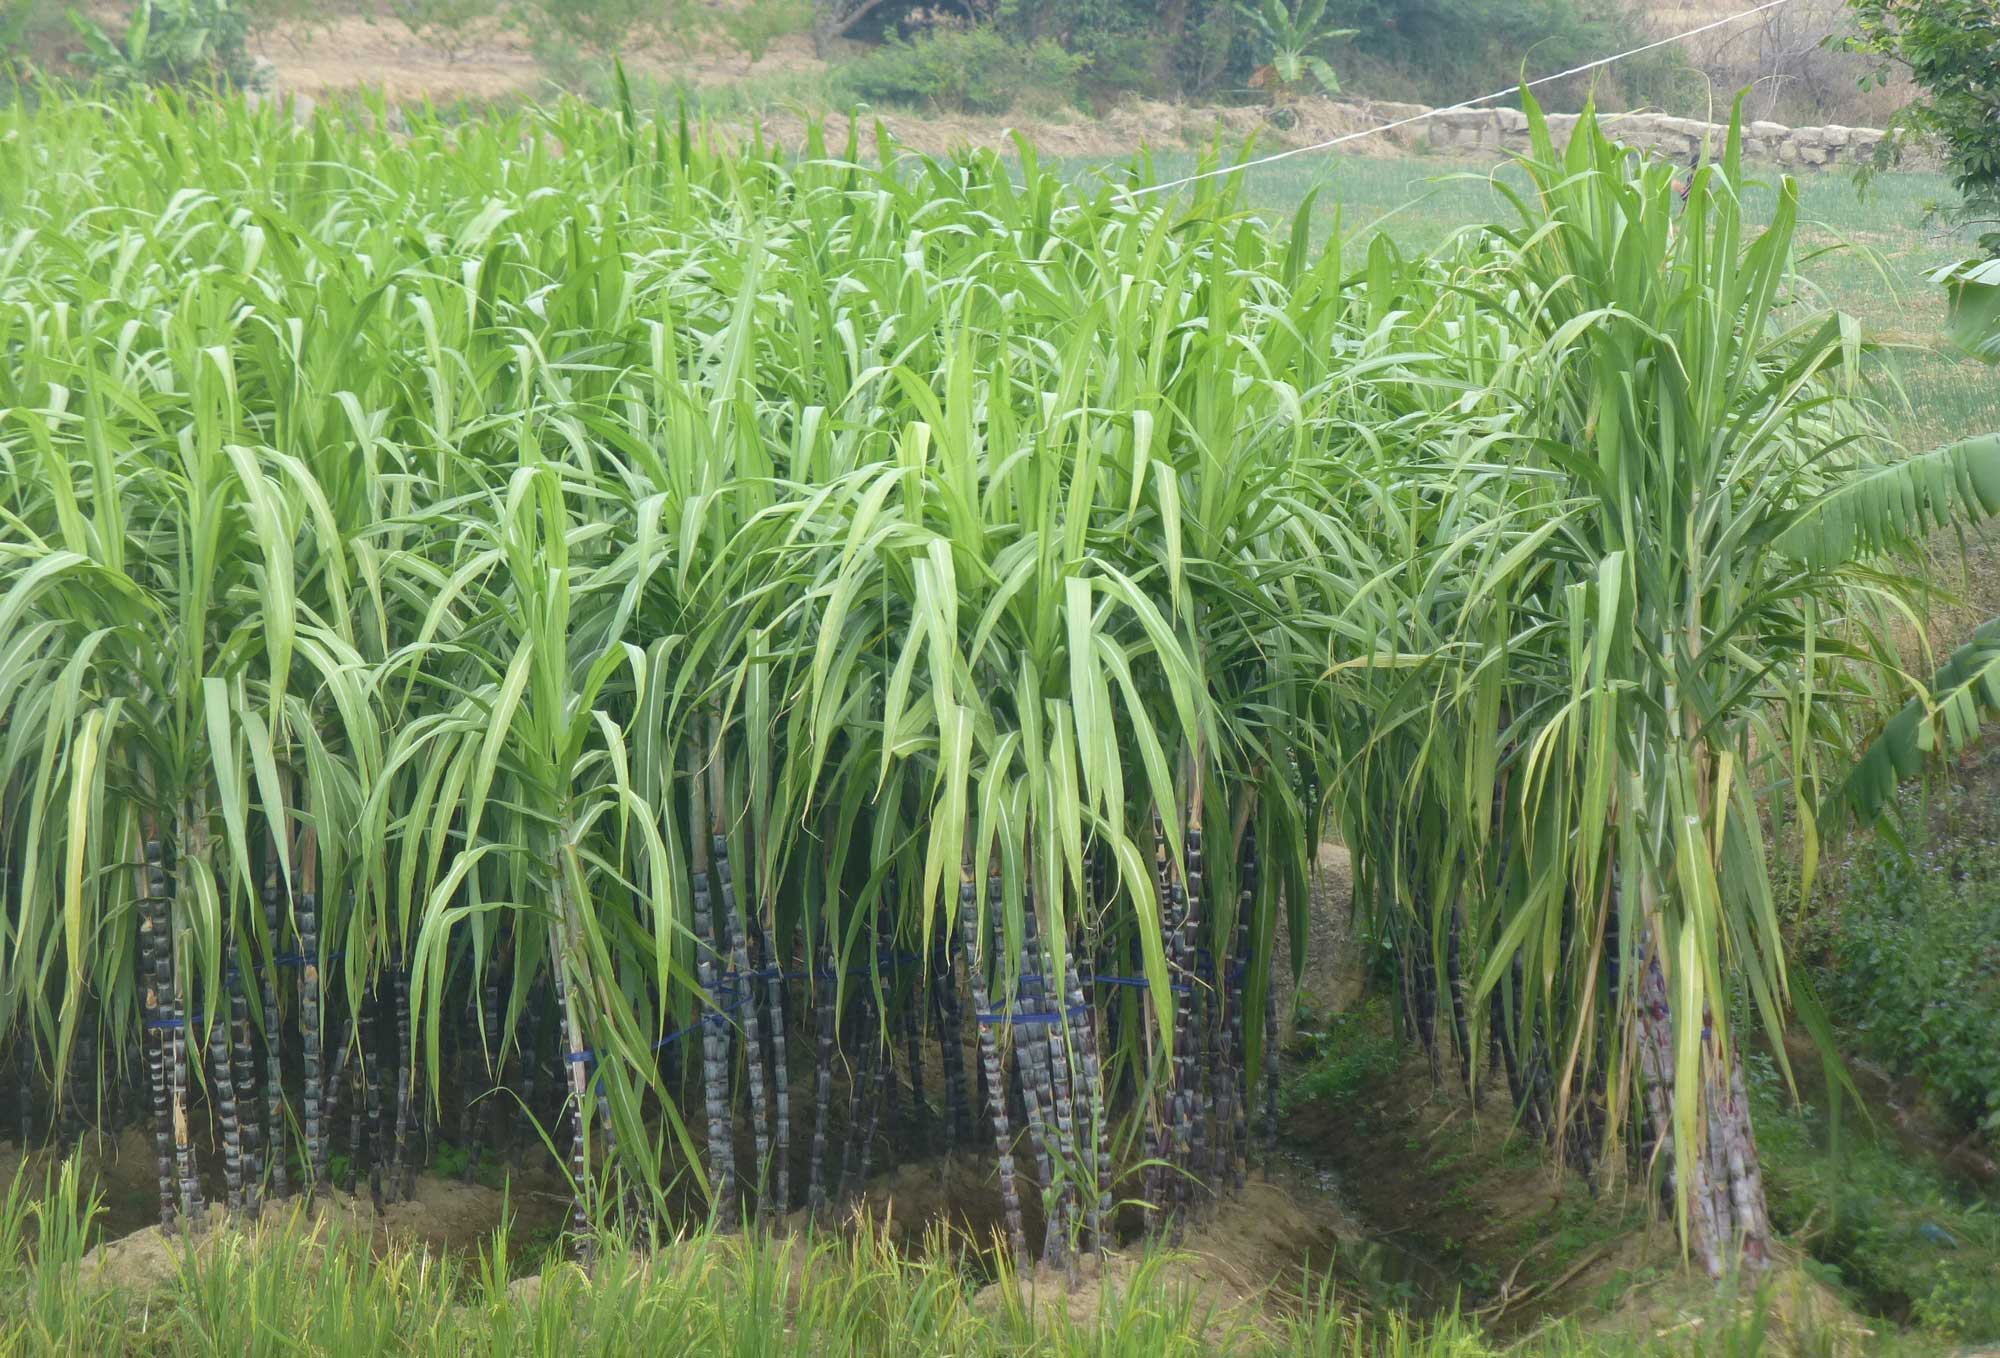 Photograph of a sugarcane patch in Fujian, China. The photo shows a small patch of tall sugarcane with purplish stems that have white banding at the nodes and elongated green leaves at the tops.